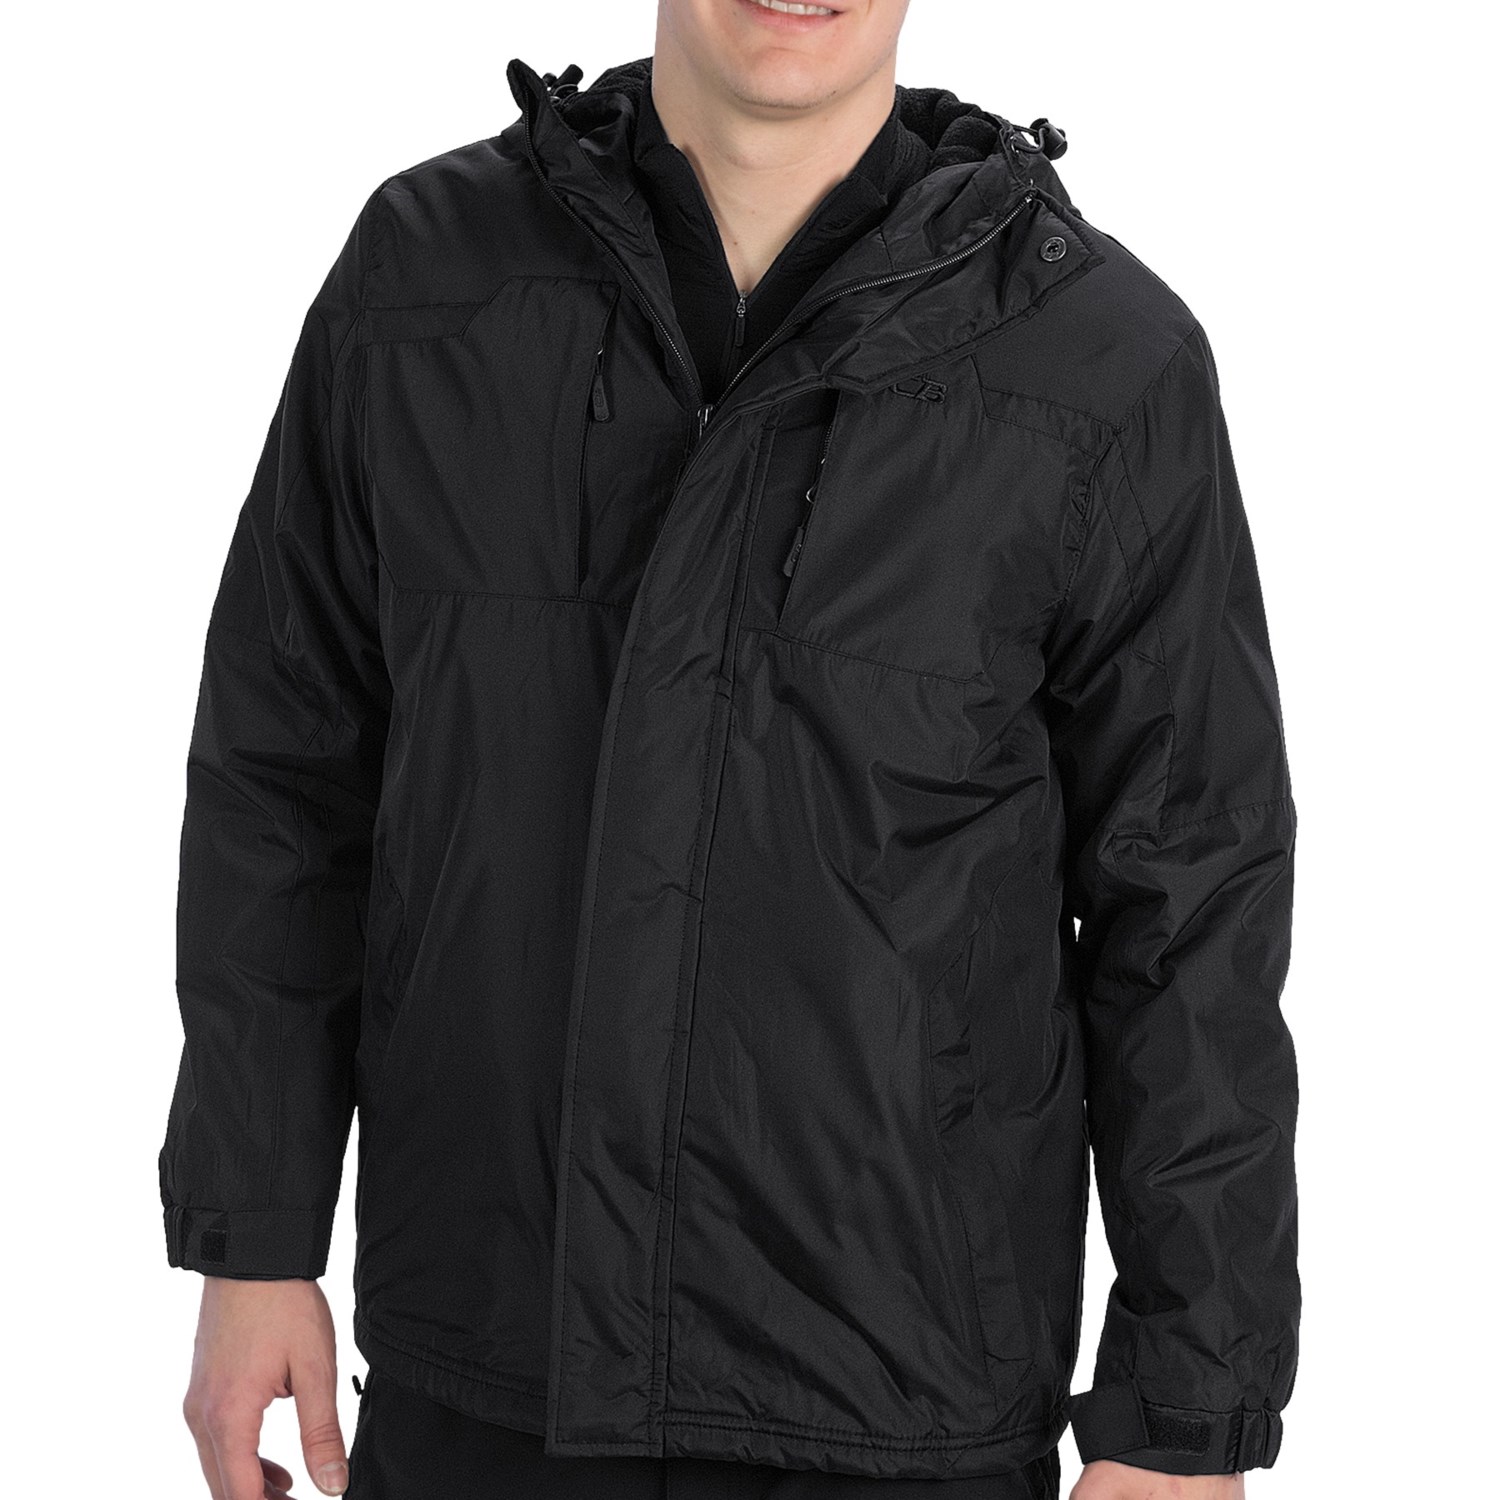 Midweight Hooded Jacket (For Men) 6876N - Save 58%